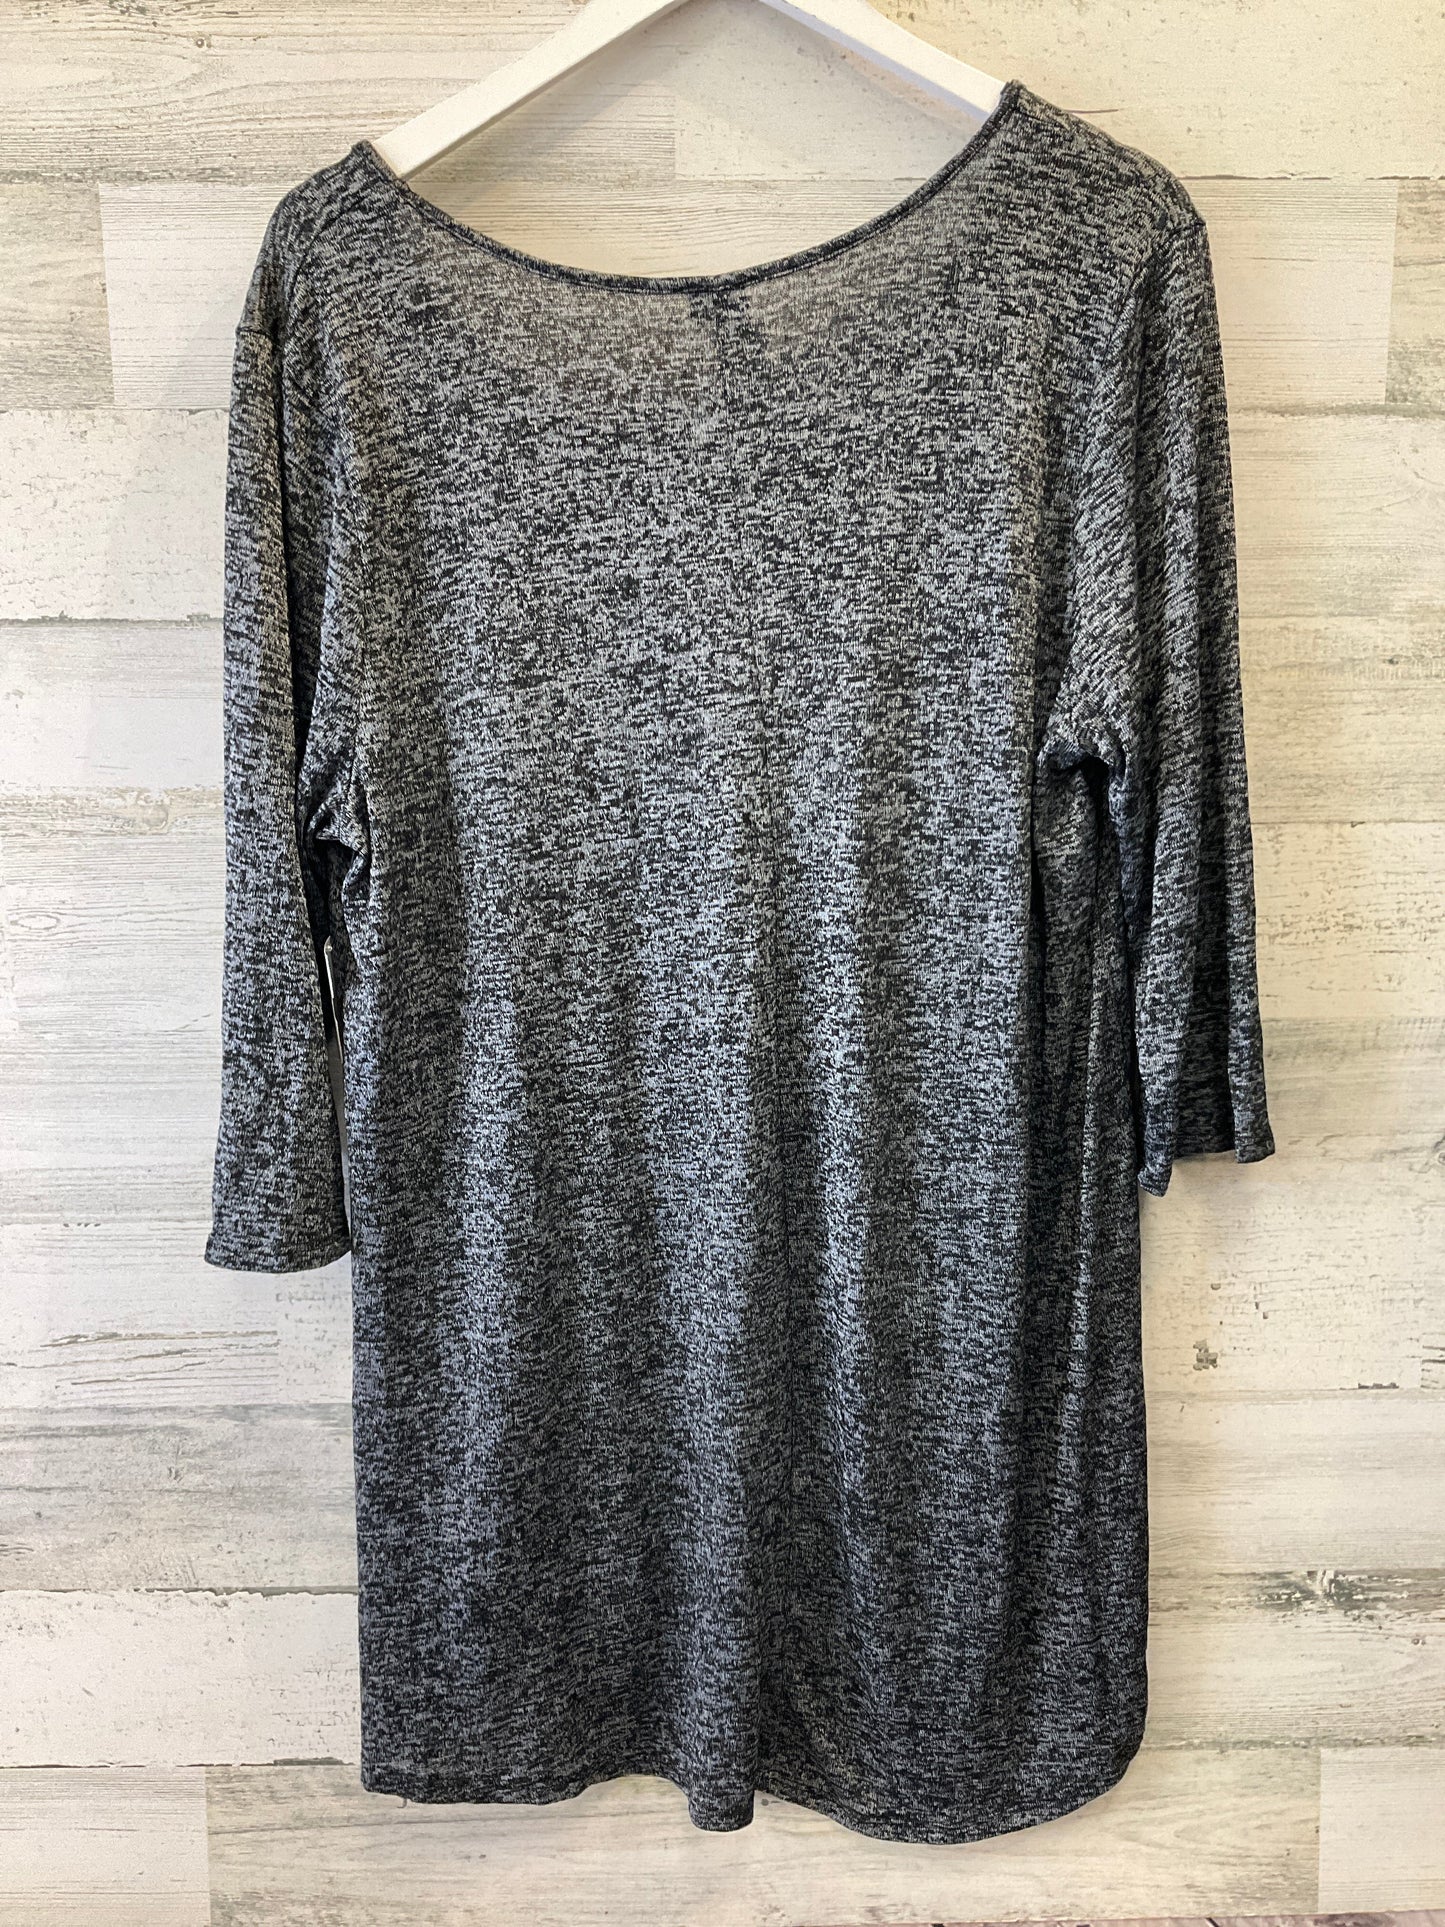 Black Top 3/4 Sleeve Clothes Mentor, Size 3x